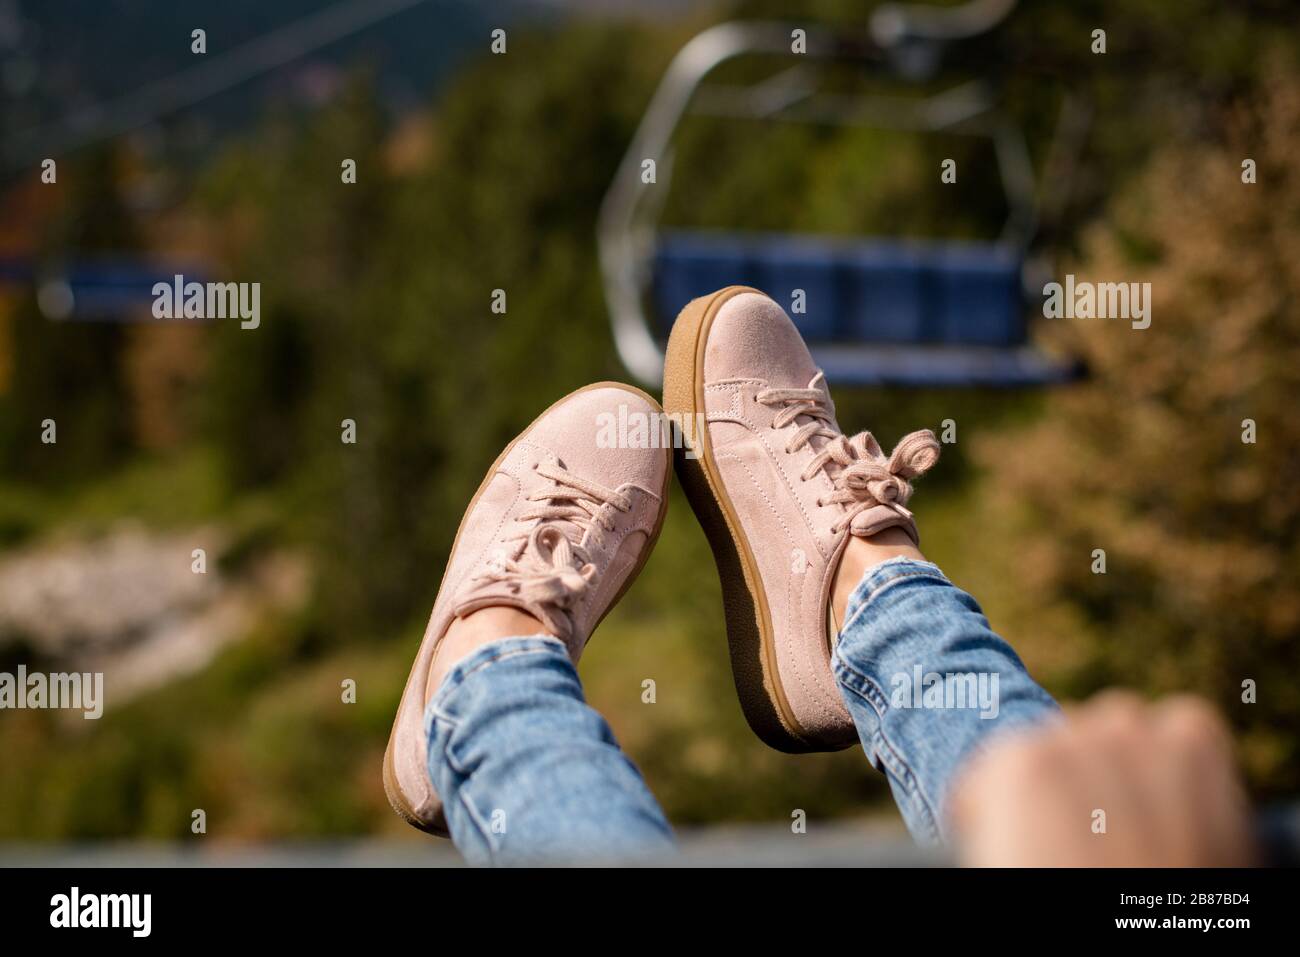 chairlift ride view with pink sneakers Stock Photo